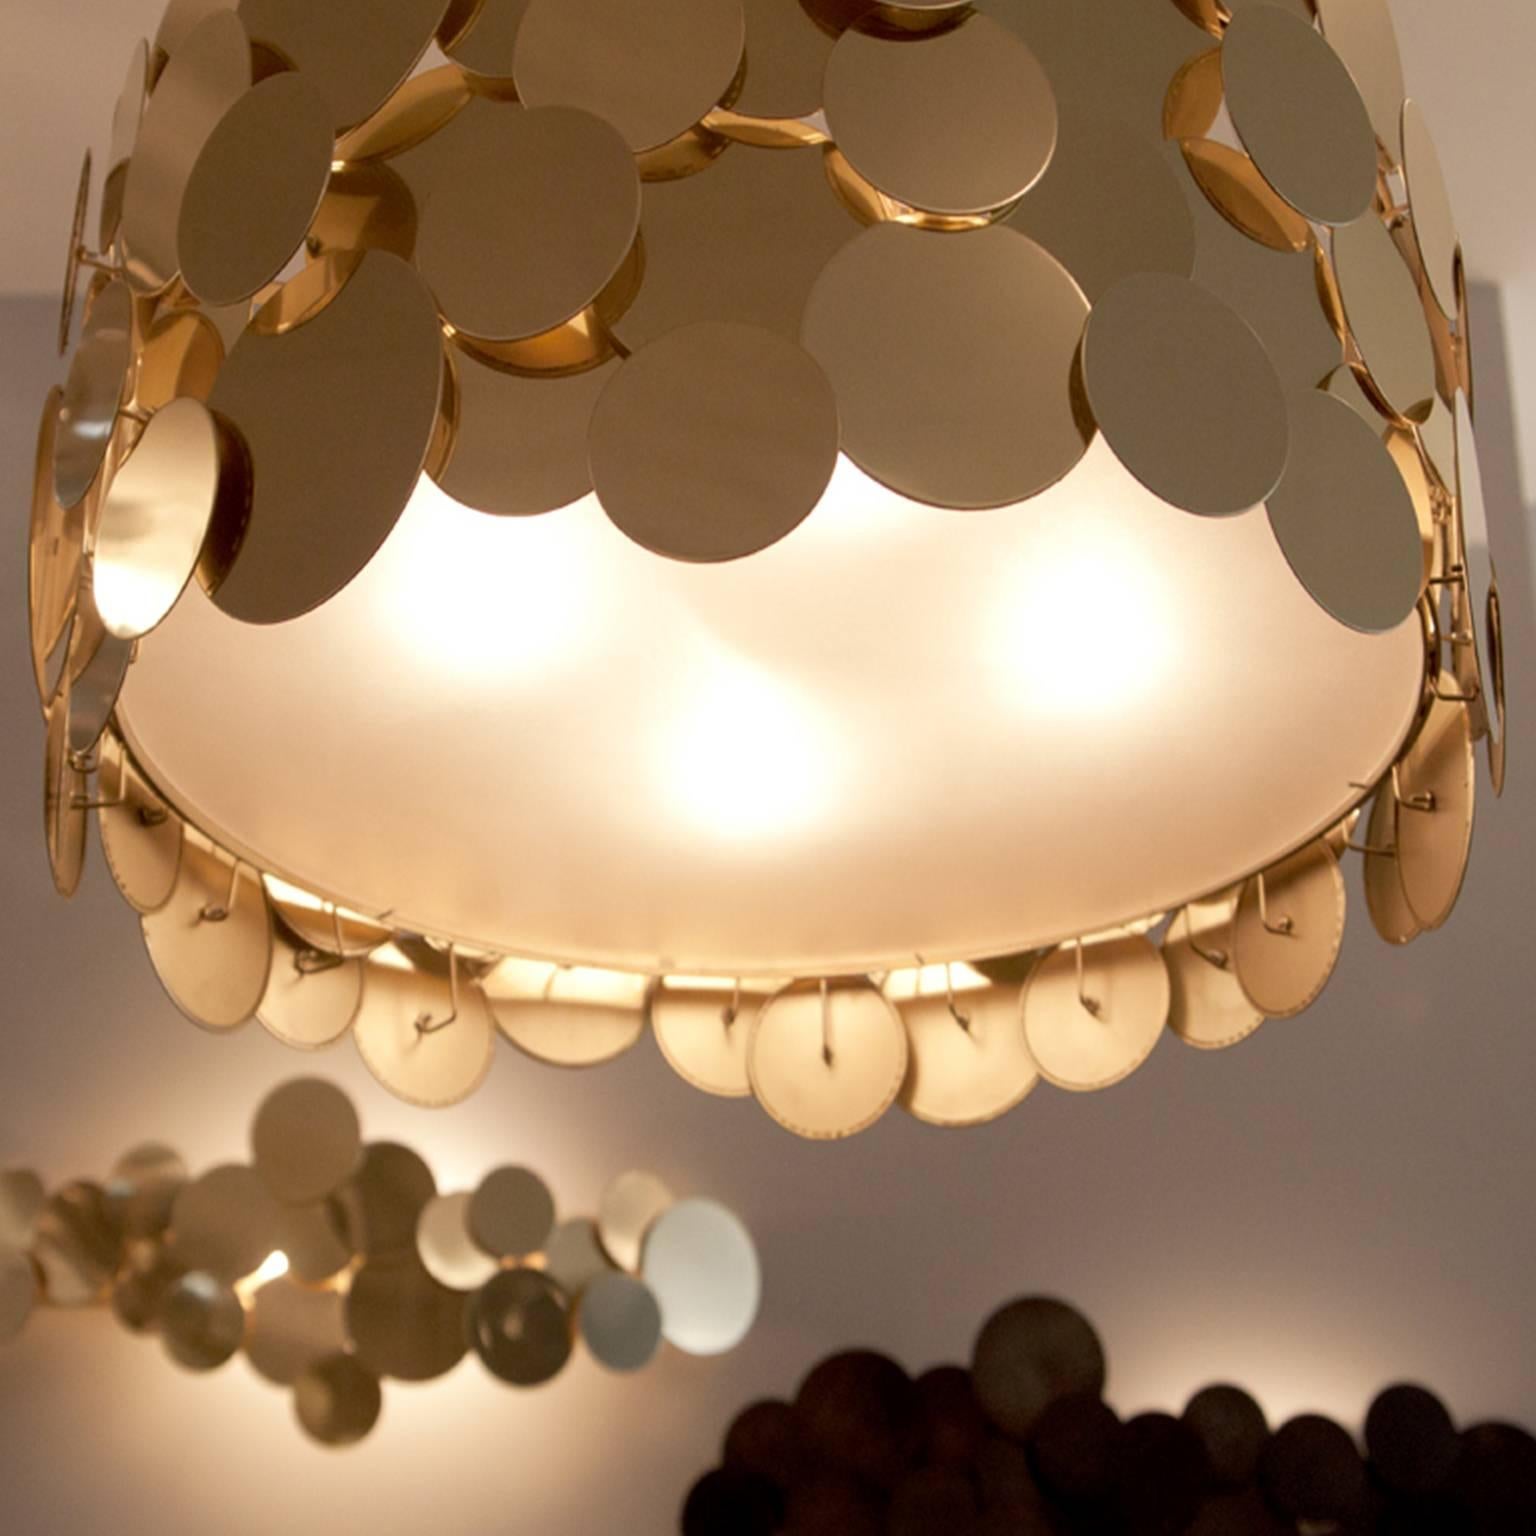 Polished brass metal disc chandelier
Measures: 41” W x 26” D x 16" H
Approximate lead time 11-12 weeks
Additional custom sizes and finishes available upon request
Made in our Tribeca, New York City, studio and showroom, by trans-LUXE